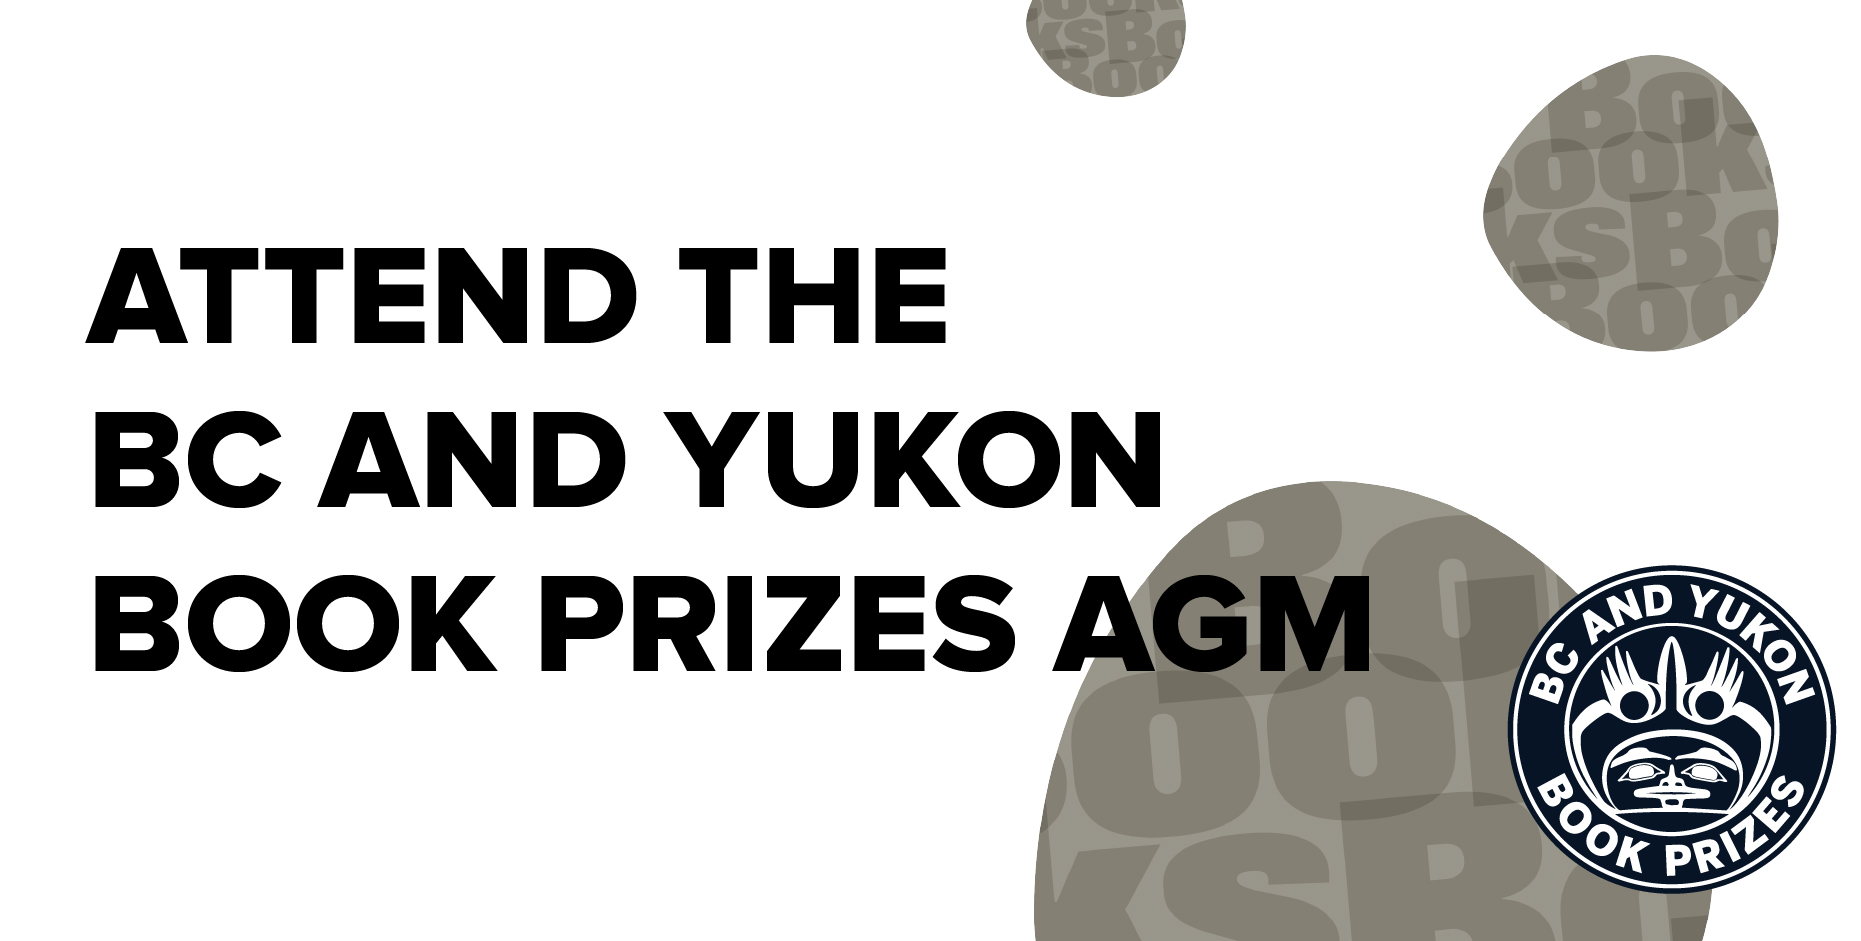 Attend the BC and Yukon Book Prizes Annual General Meeting